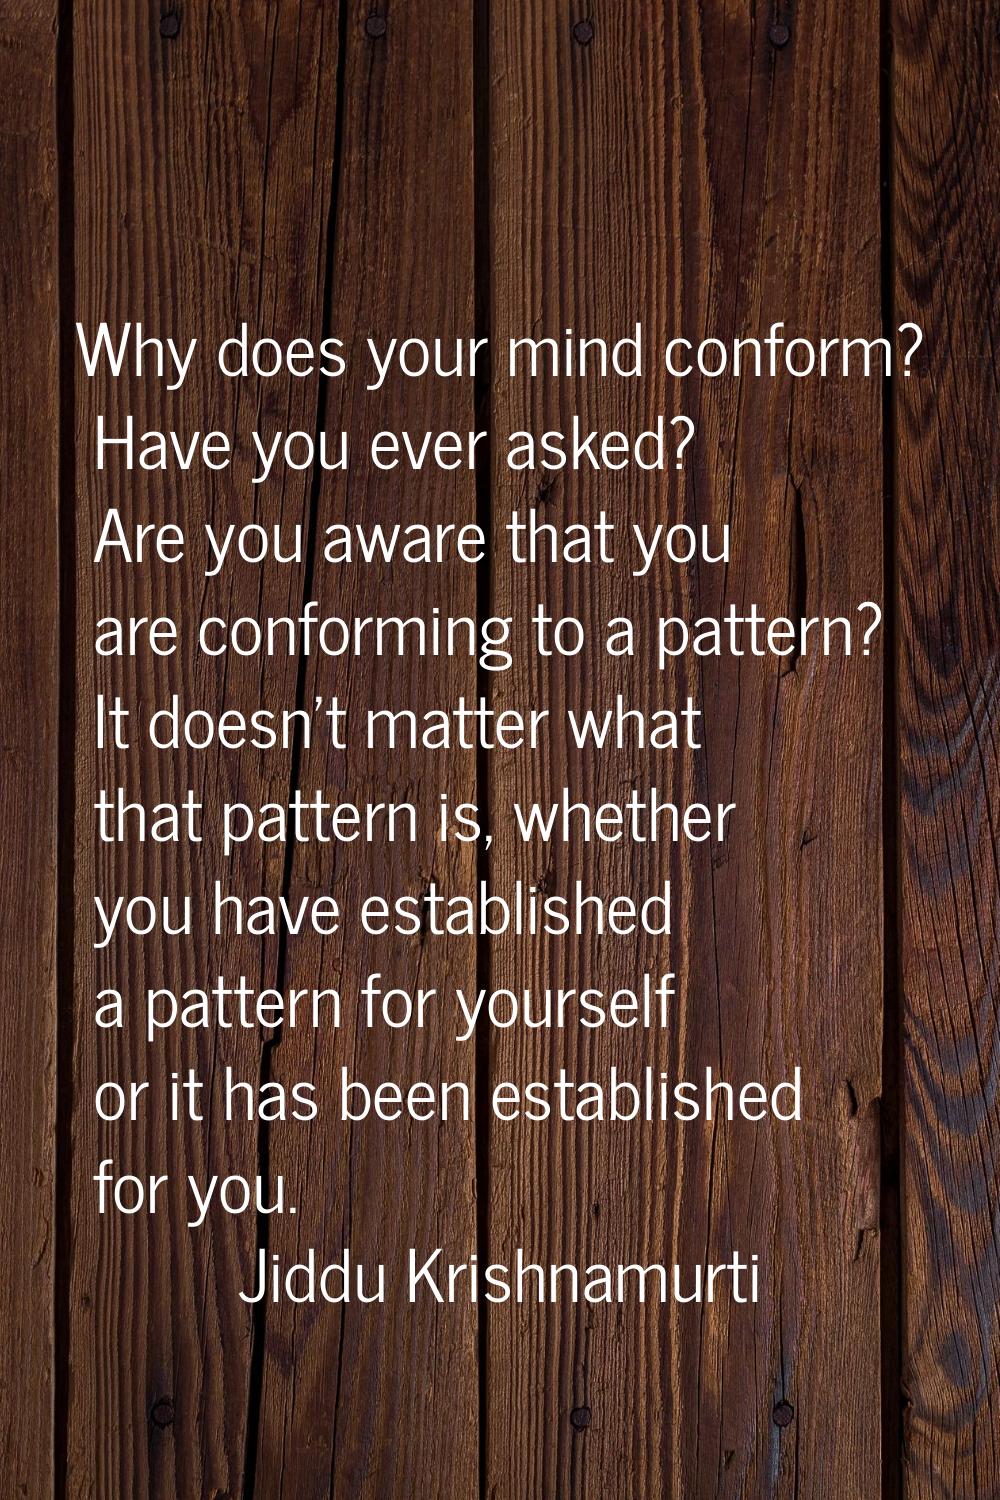 Why does your mind conform? Have you ever asked? Are you aware that you are conforming to a pattern